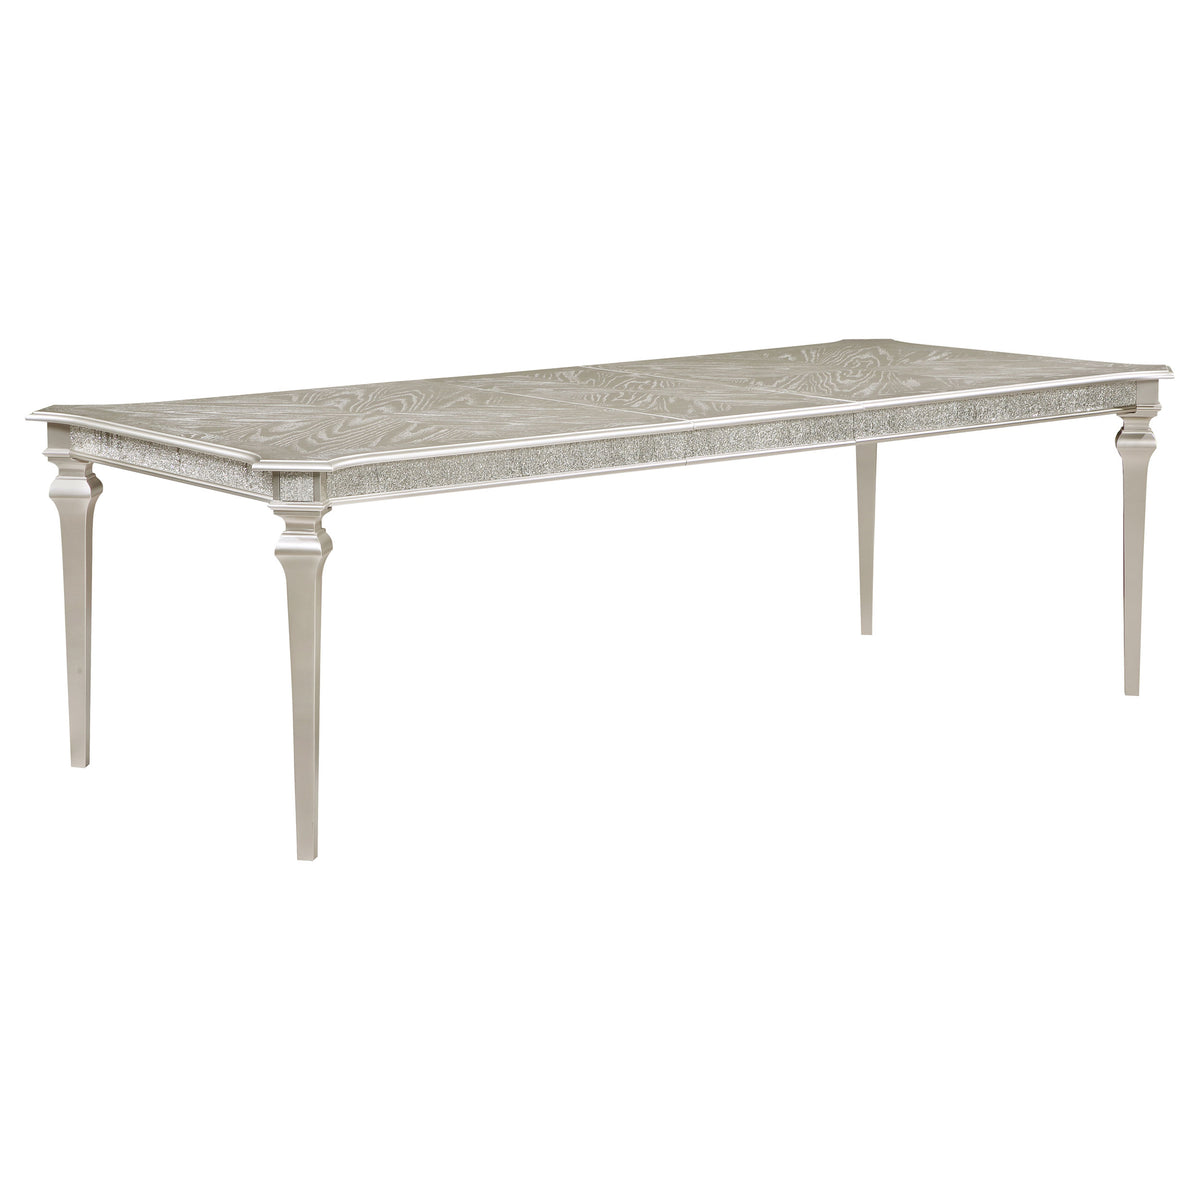 Evangeline Rectangular Dining Table with Extension Leaf Silver Oak Evangeline Rectangular Dining Table with Extension Leaf Silver Oak Half Price Furniture